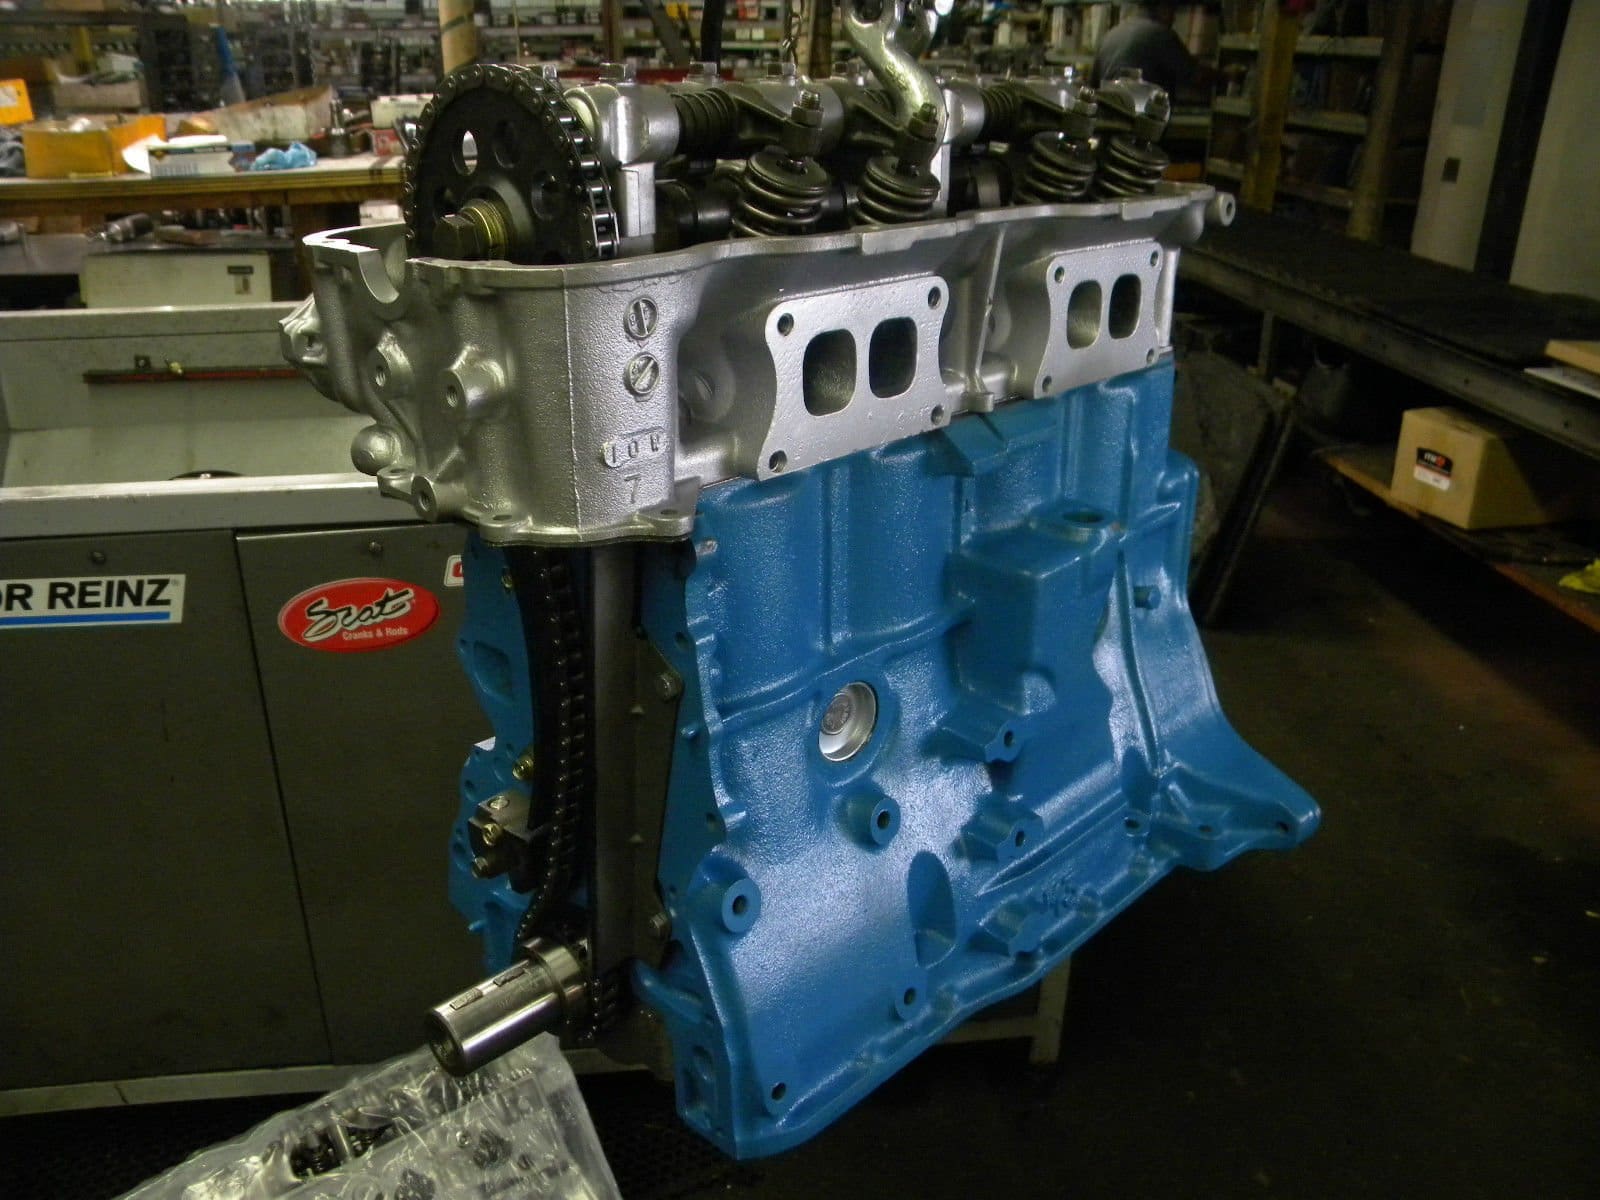 NISSAN-Z24-83-89-REBULT-ENGINE(CNG PROPAIN )-PLUS A 400.00 CORE DEPOSIT REQUIRED